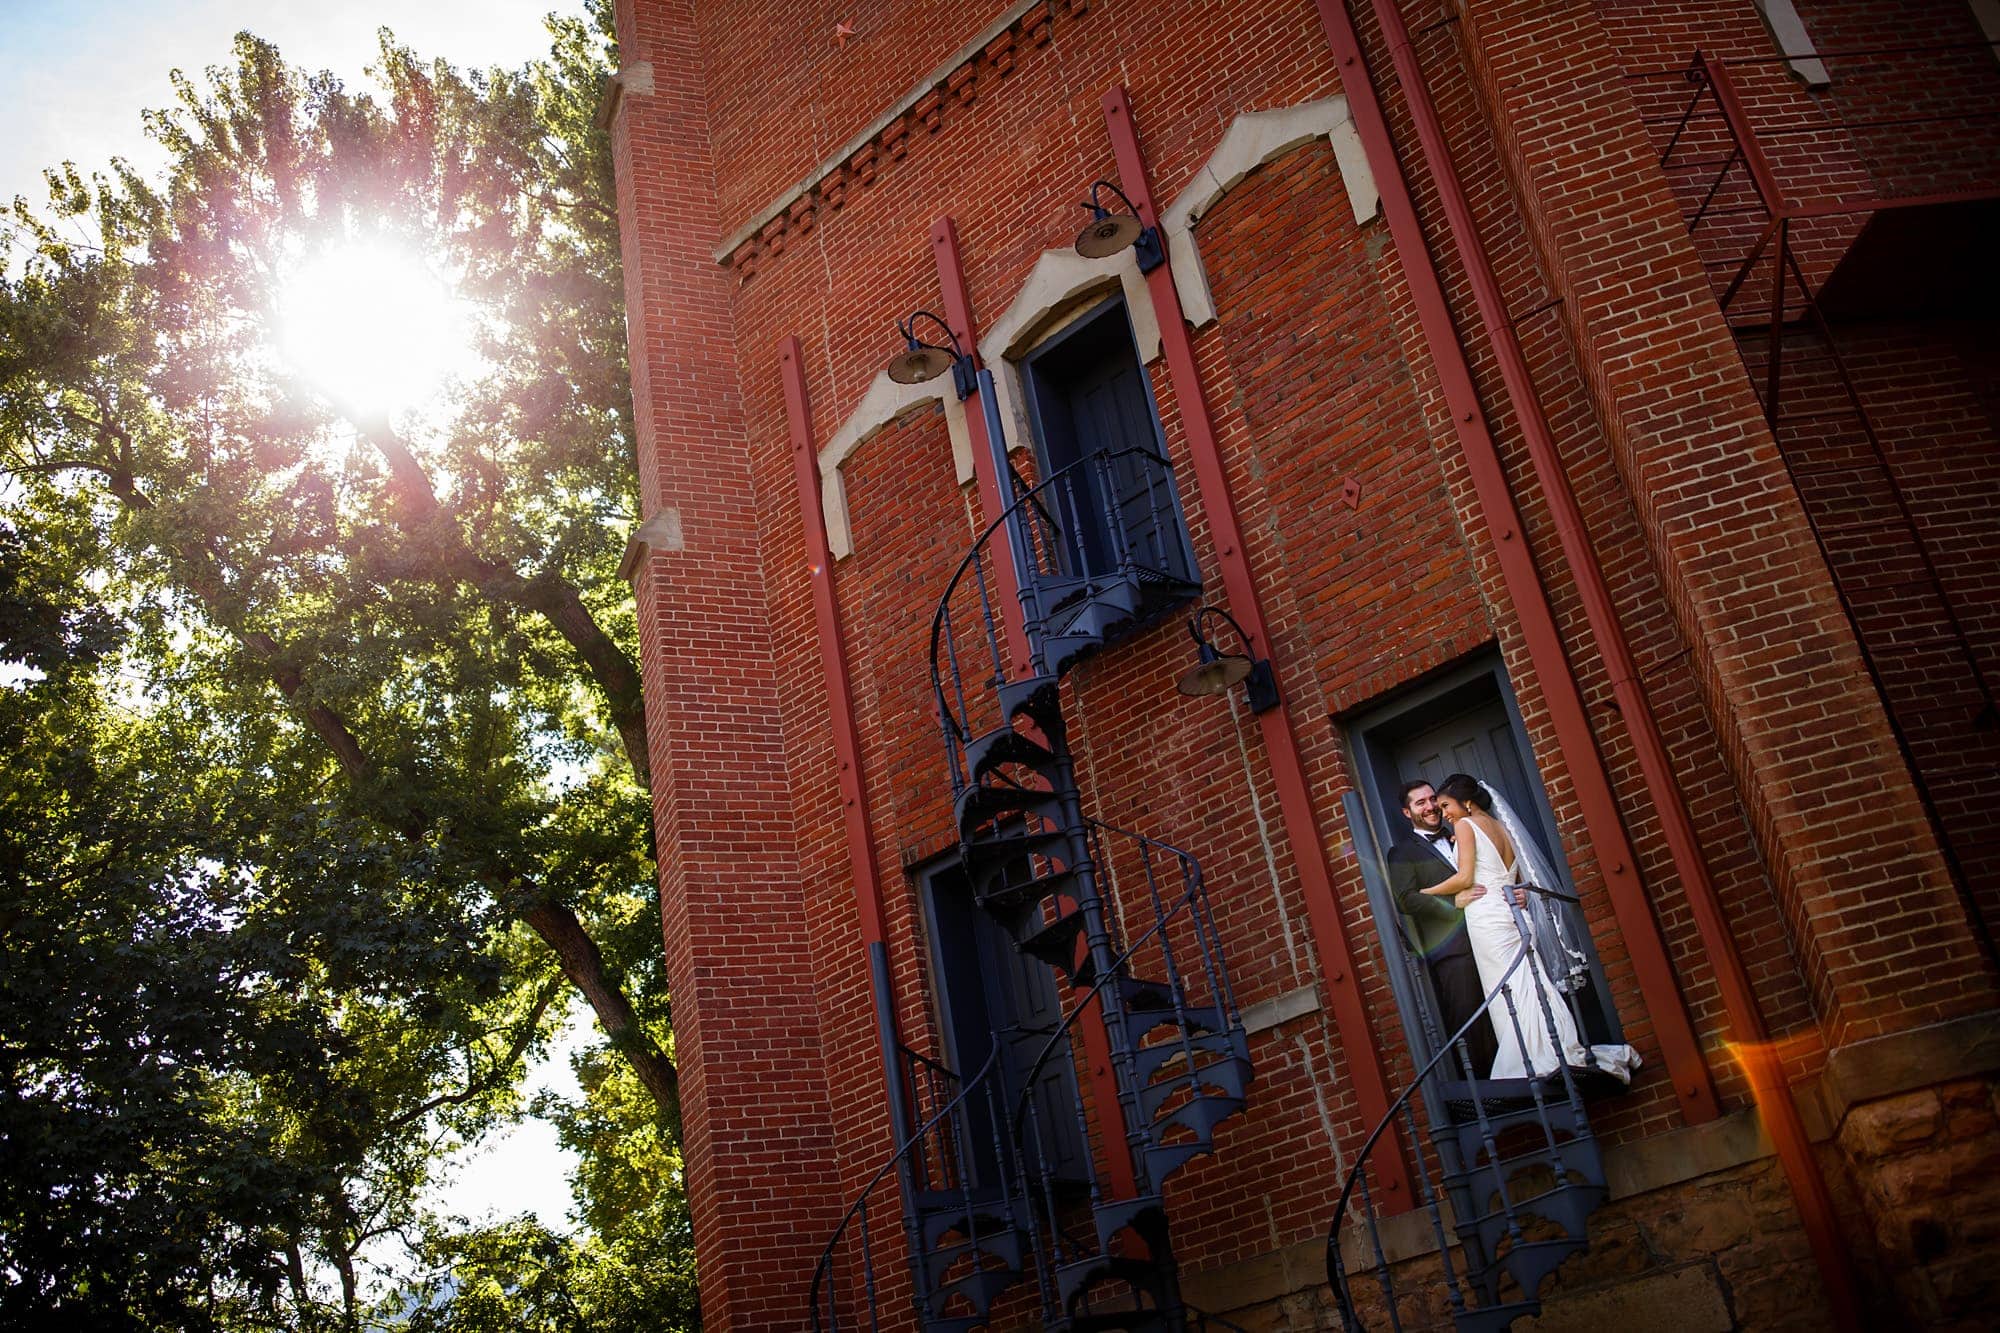 Megan and Bryan pose on the staircase of Old Main on the University of Colorado campus before their wedding